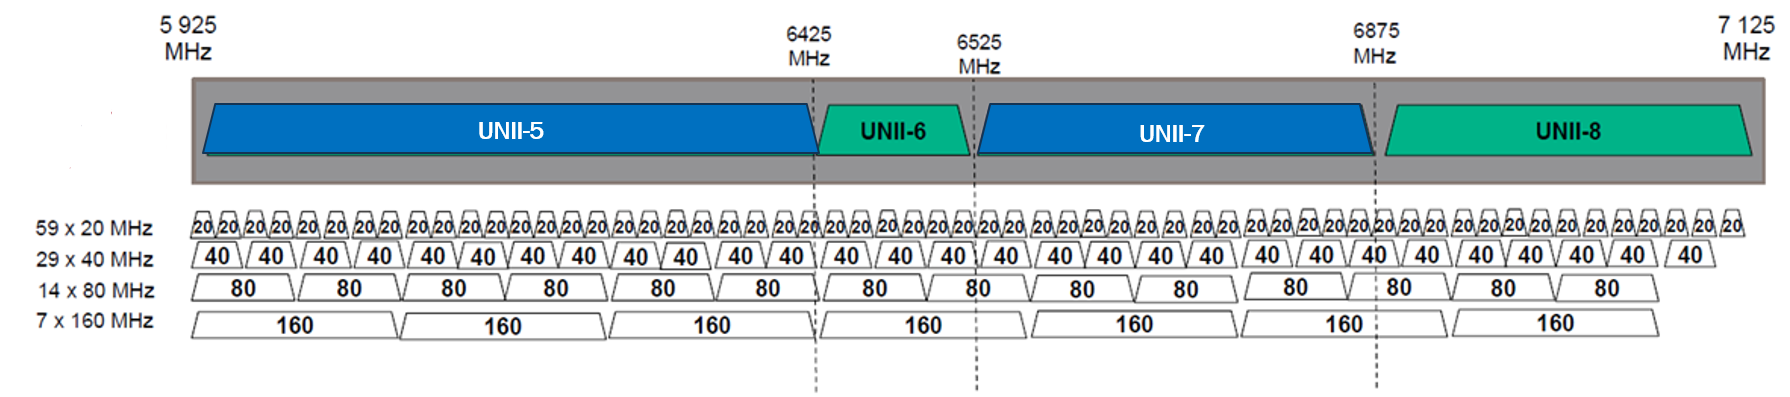 US 6GHz frequency band